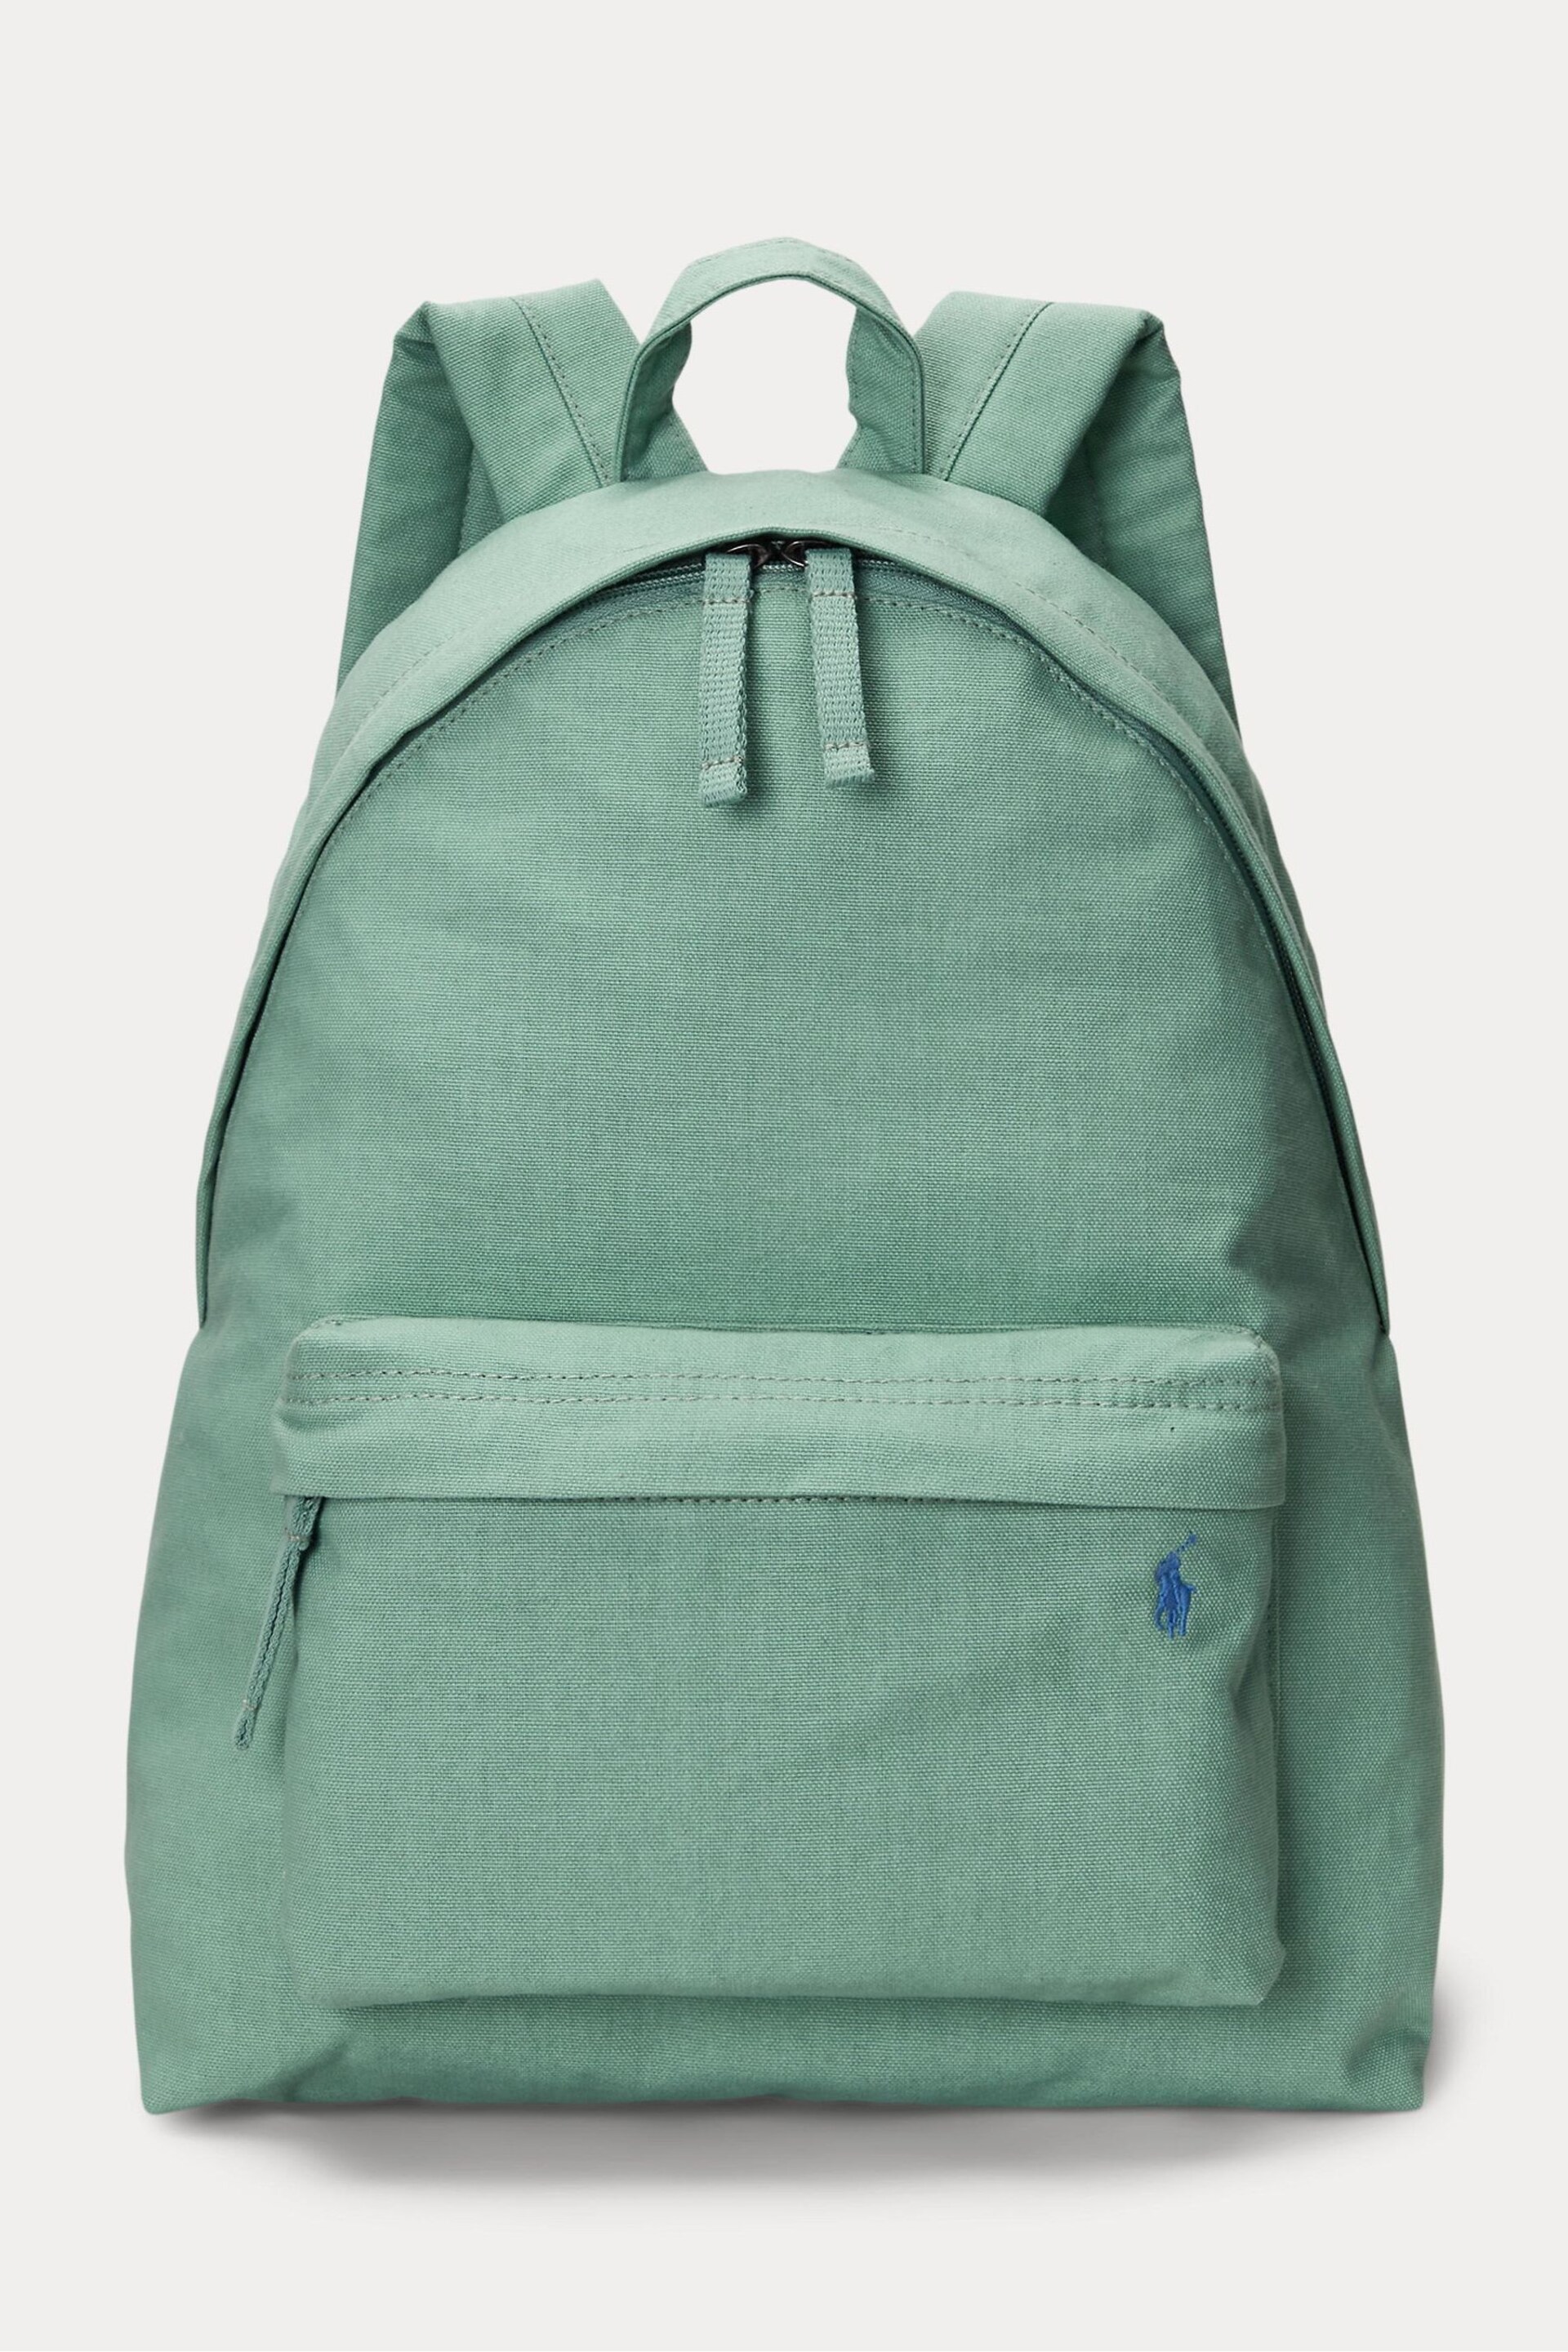 Polo Ralph Lauren Canvas Backpack - Image 1 of 7